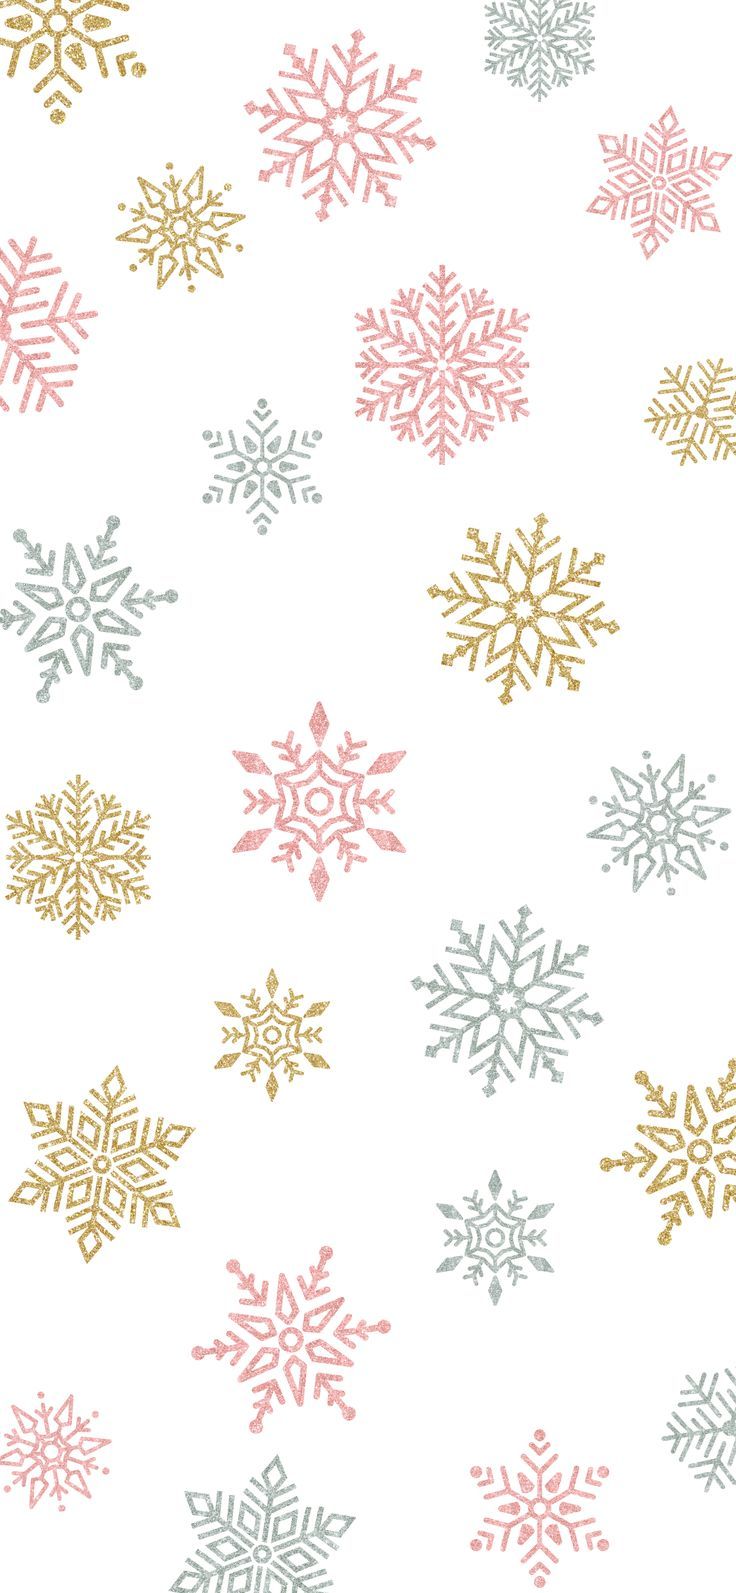 A pattern of colorful snowflakes on a white background - Snowflake